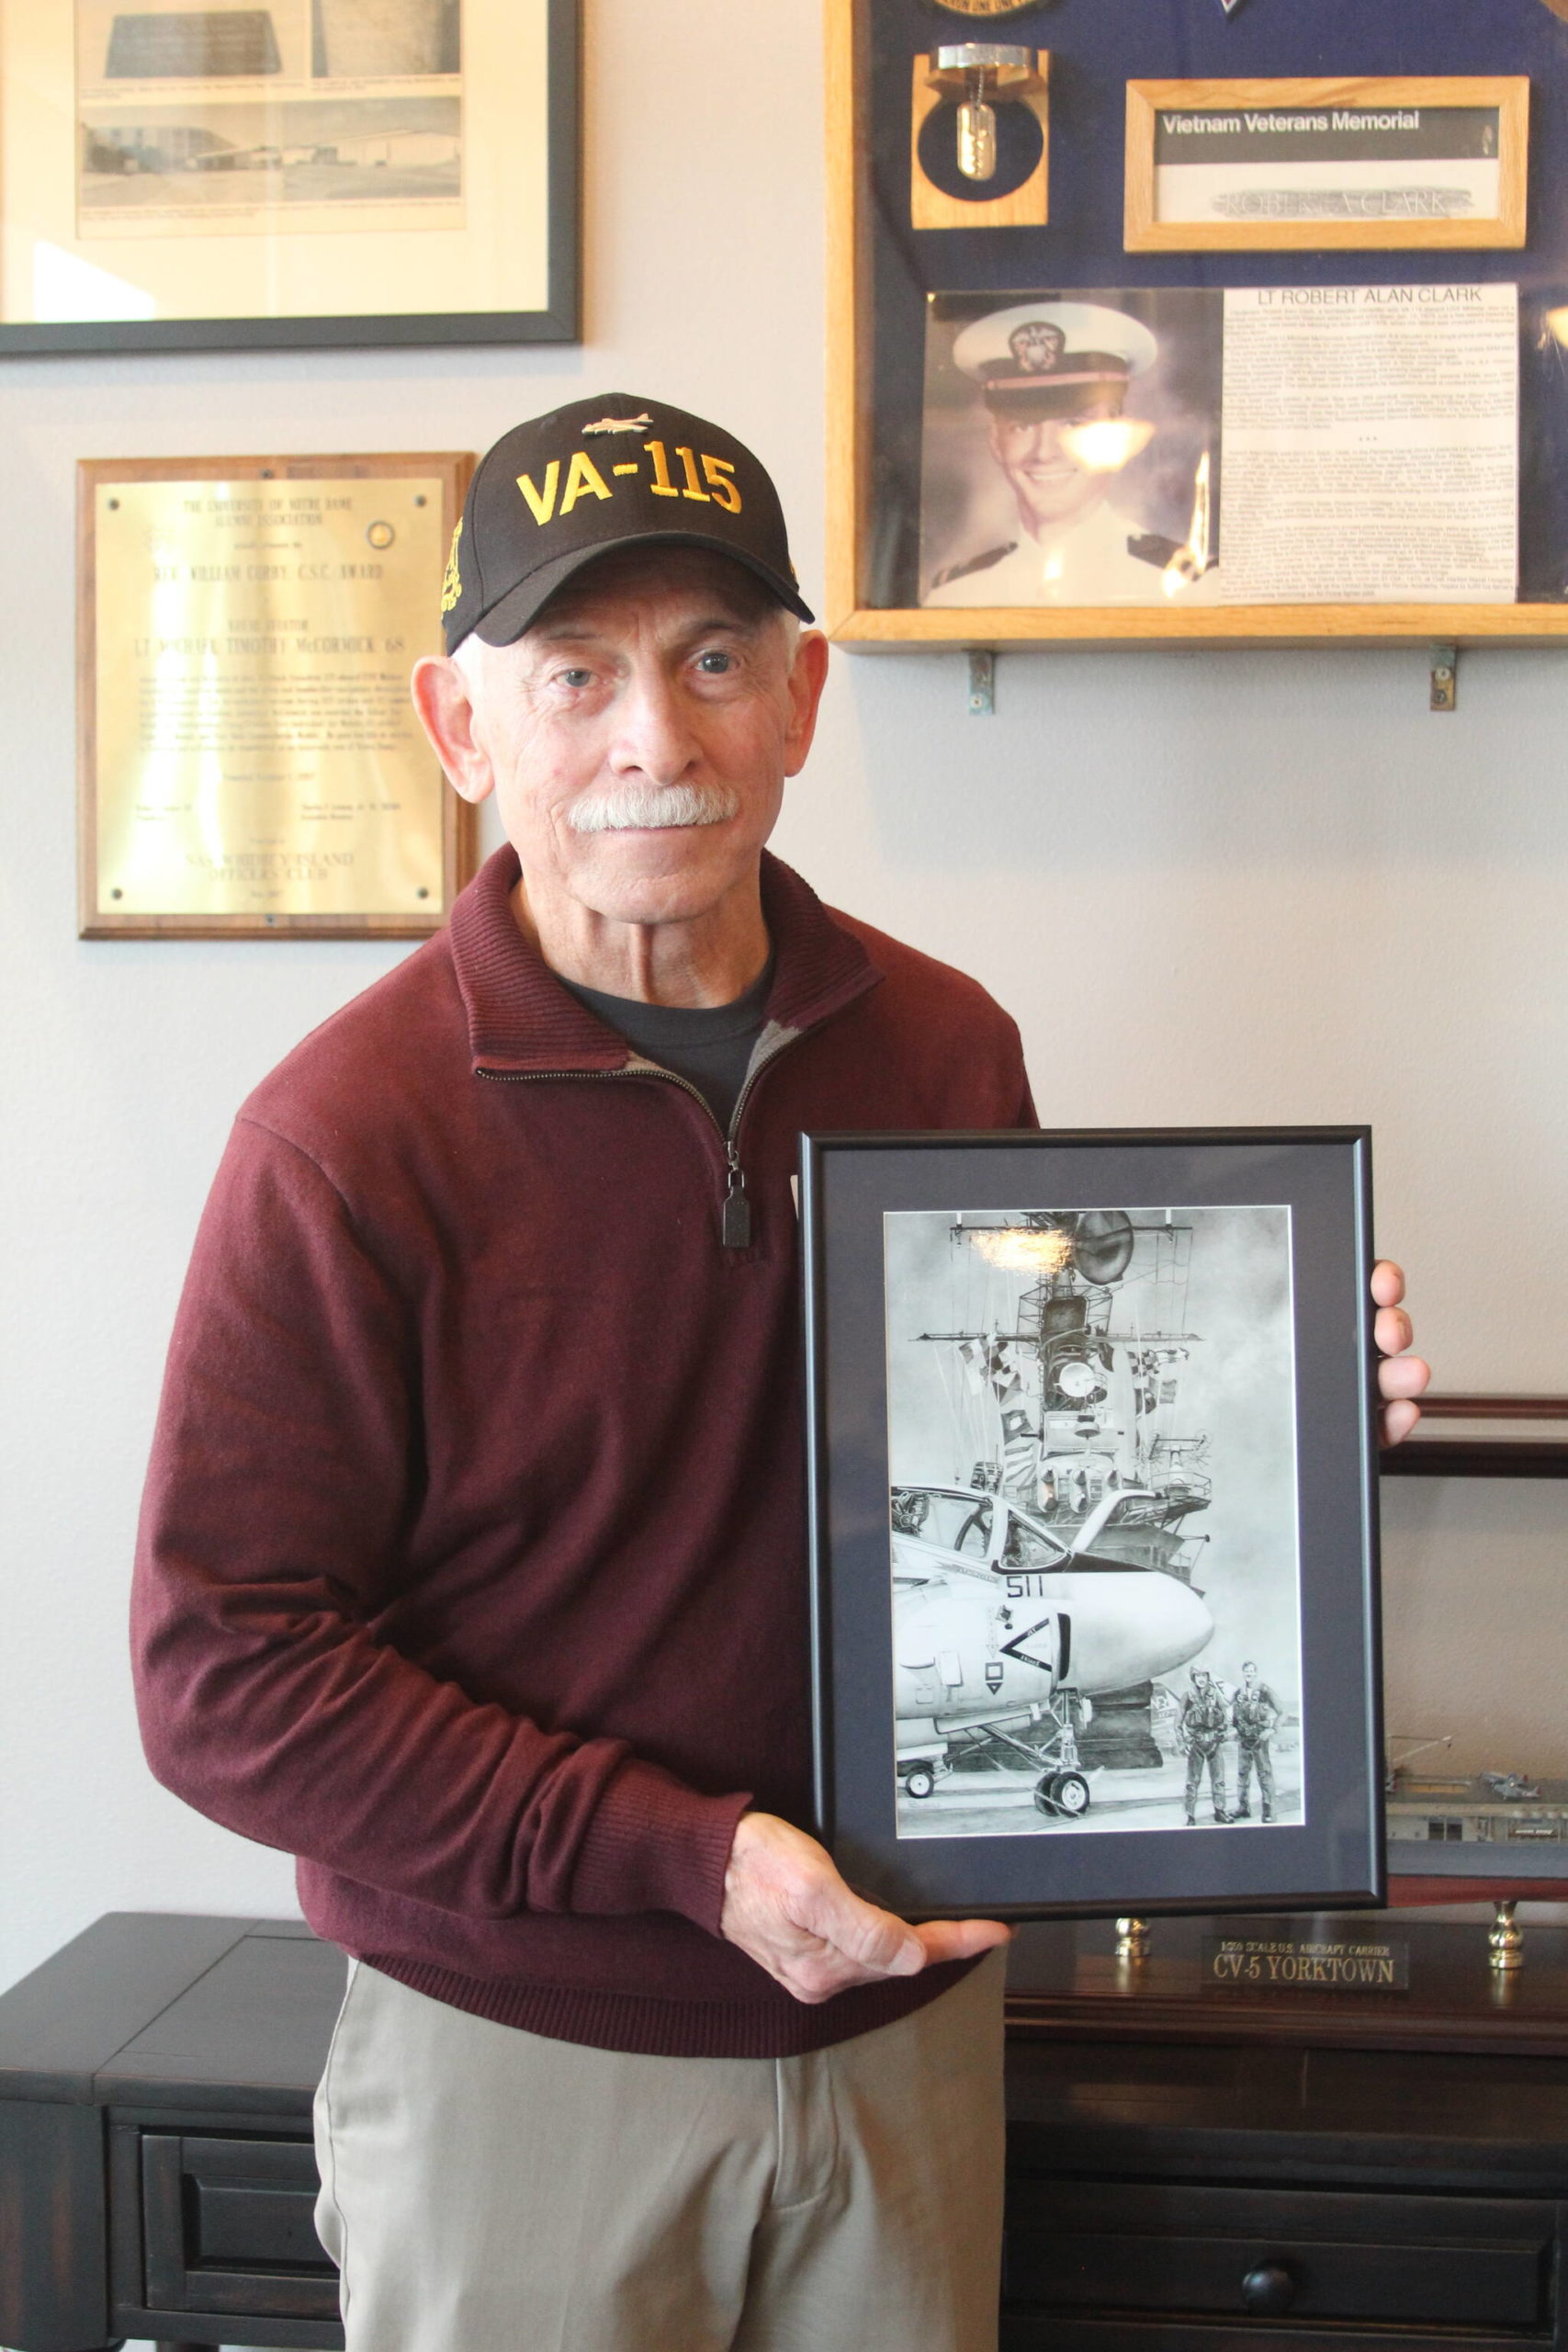 Photo by Karina Andrew/Whidbey News-Times
Former VA-115 member Rod Maskew gifts a painting he found of the last U.S. air crew lost in the Vietnam War to NAS Whidbey Island.